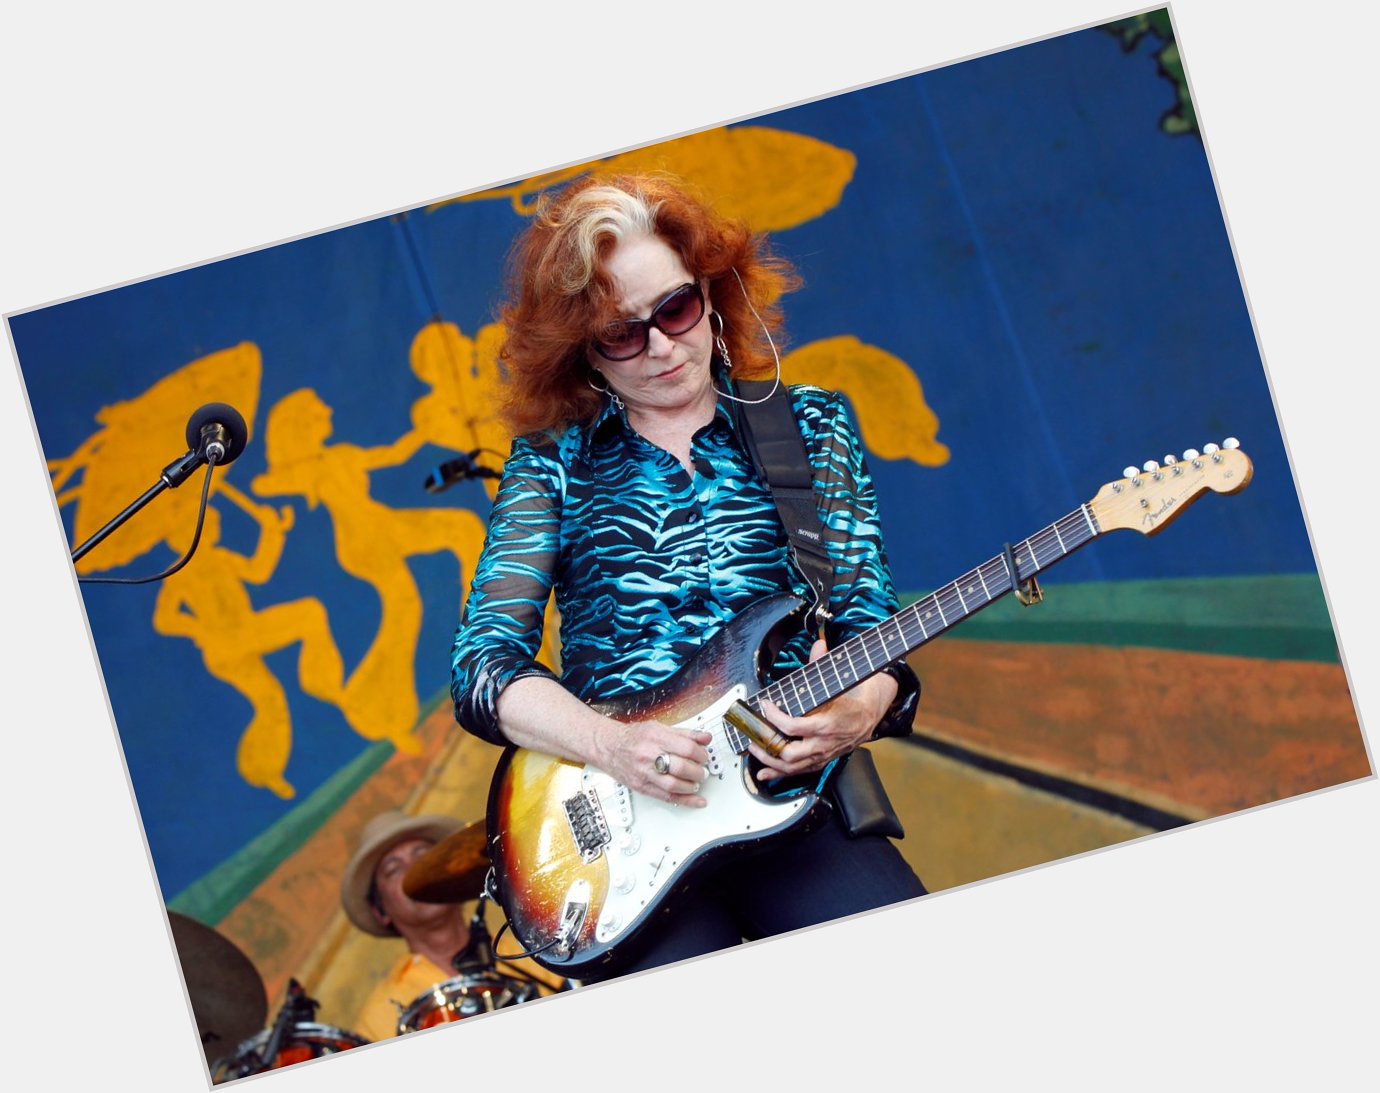 A very happy Birthday to Bonnie Raitt! 72 today and still looking and sounding amazing! 